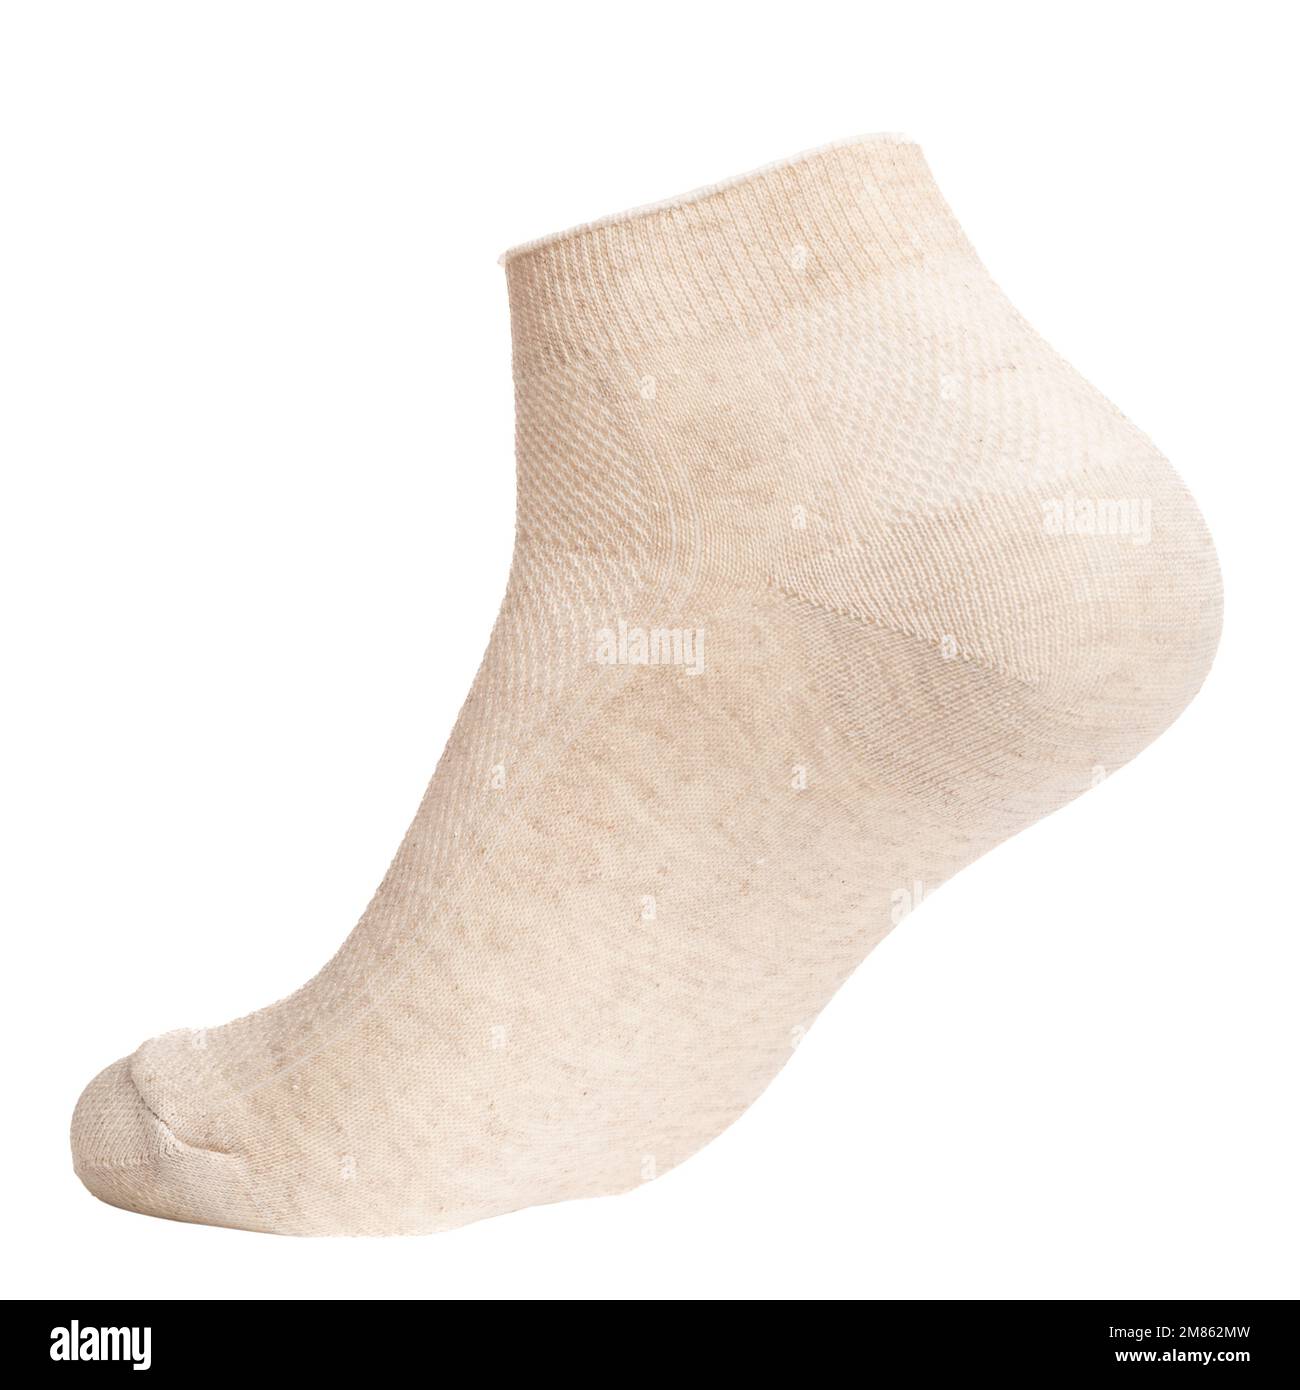 Beige cotton-blend low cut ankle sock on foot mannequin isolated on a white background Stock Photo